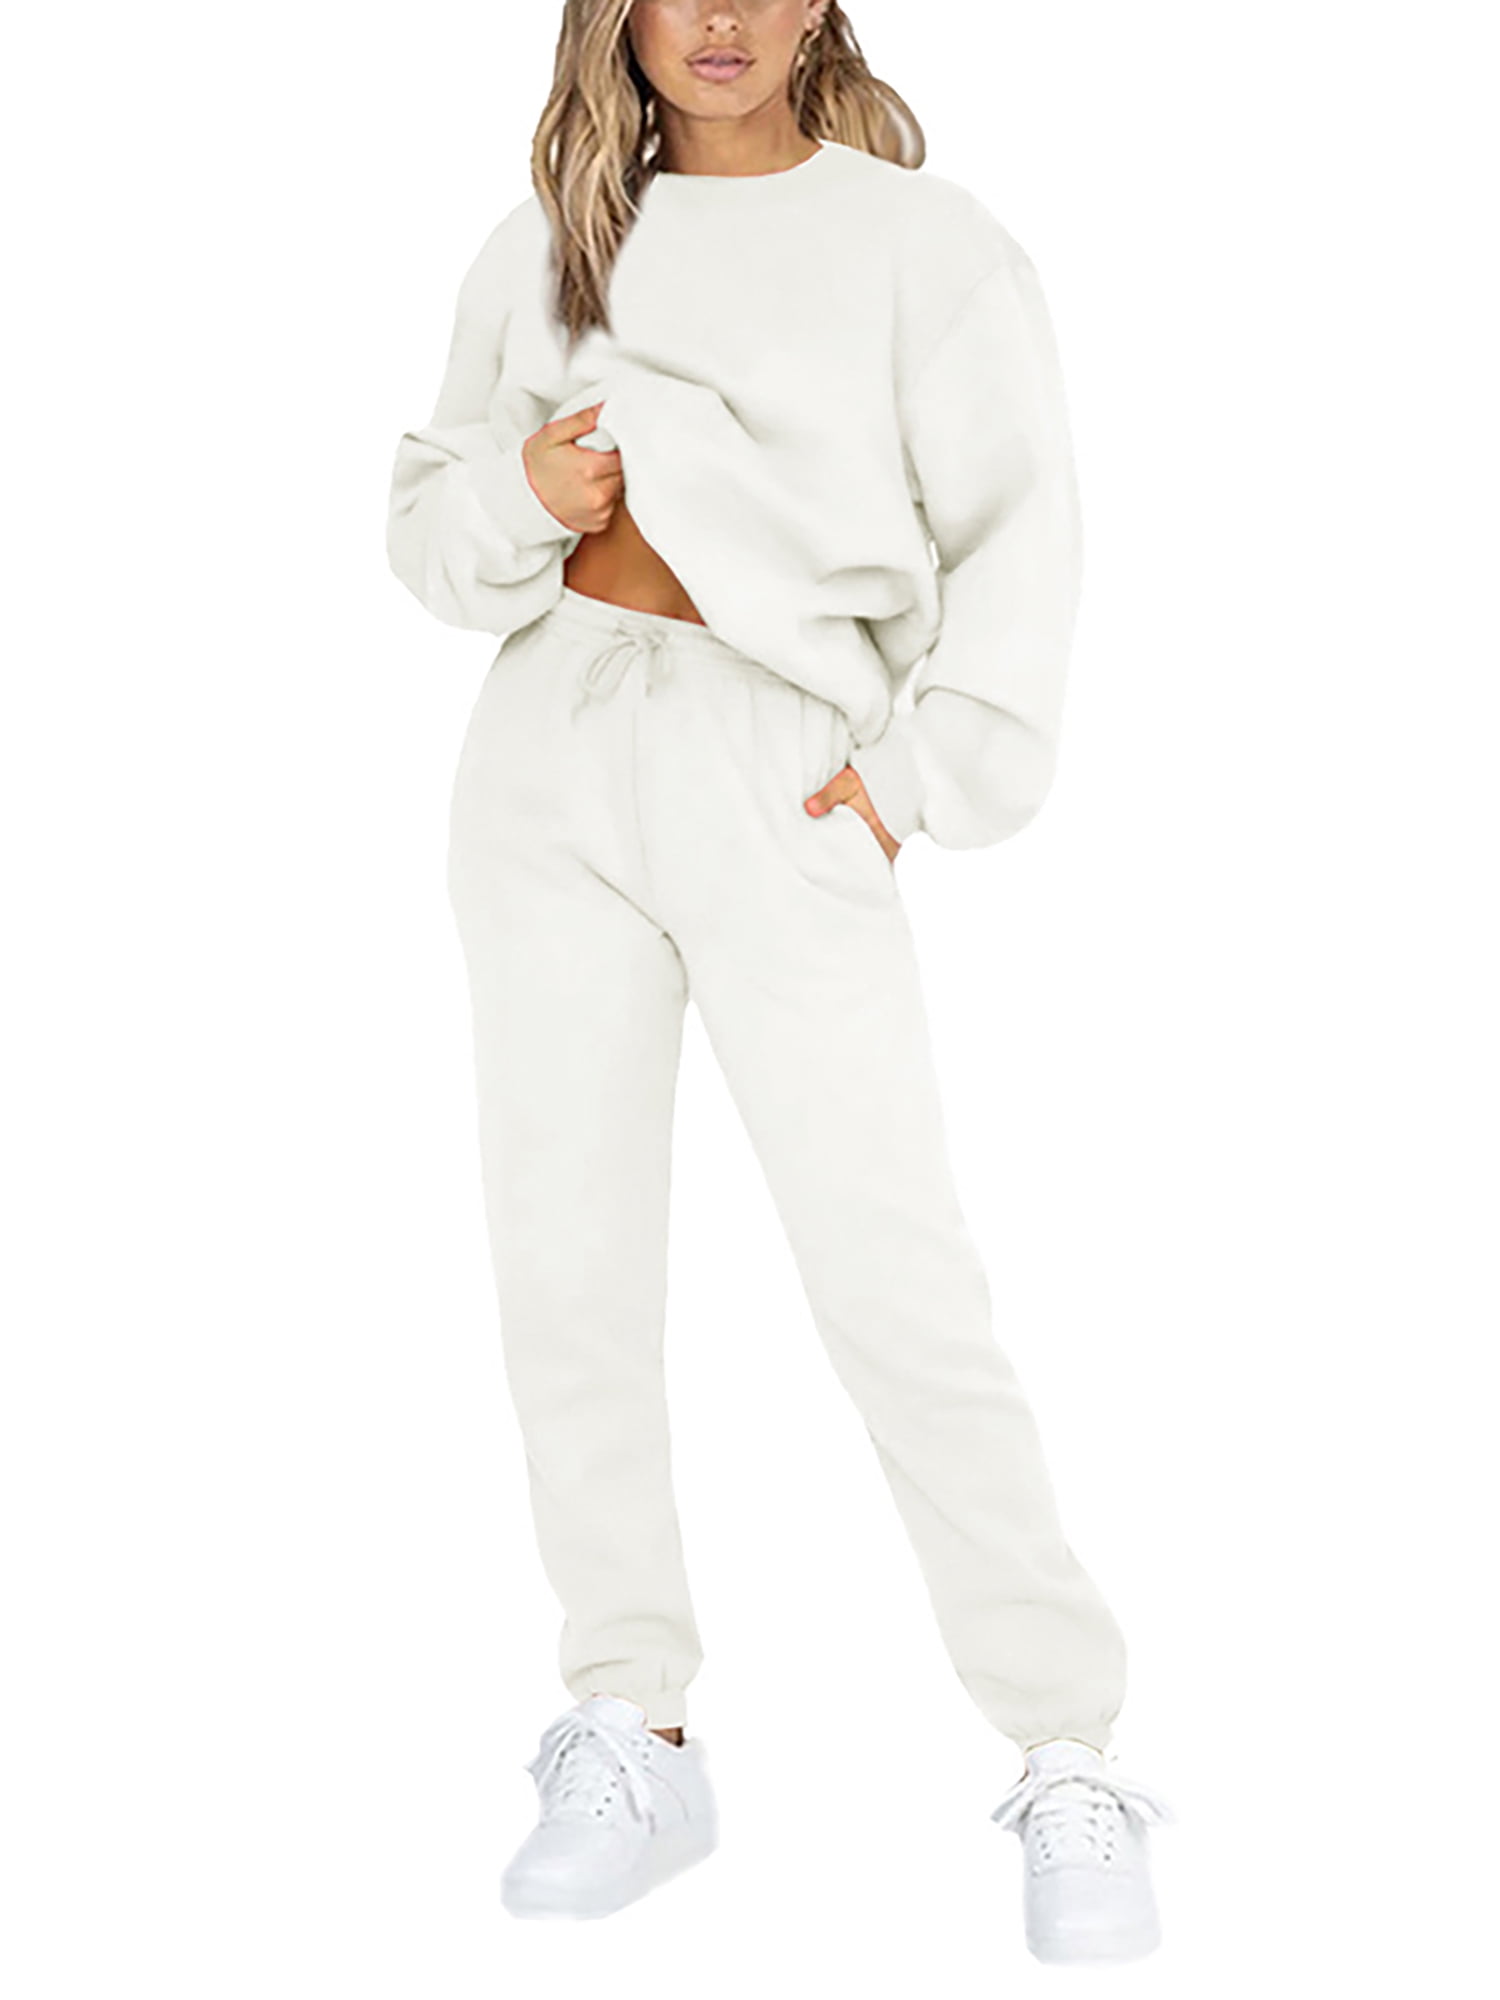 Capreze Long Sleeve Sweatsuits For Womens Solid Color Casual Lounge Sets  Long Sleeve Activewear Joggers Outfits White M 